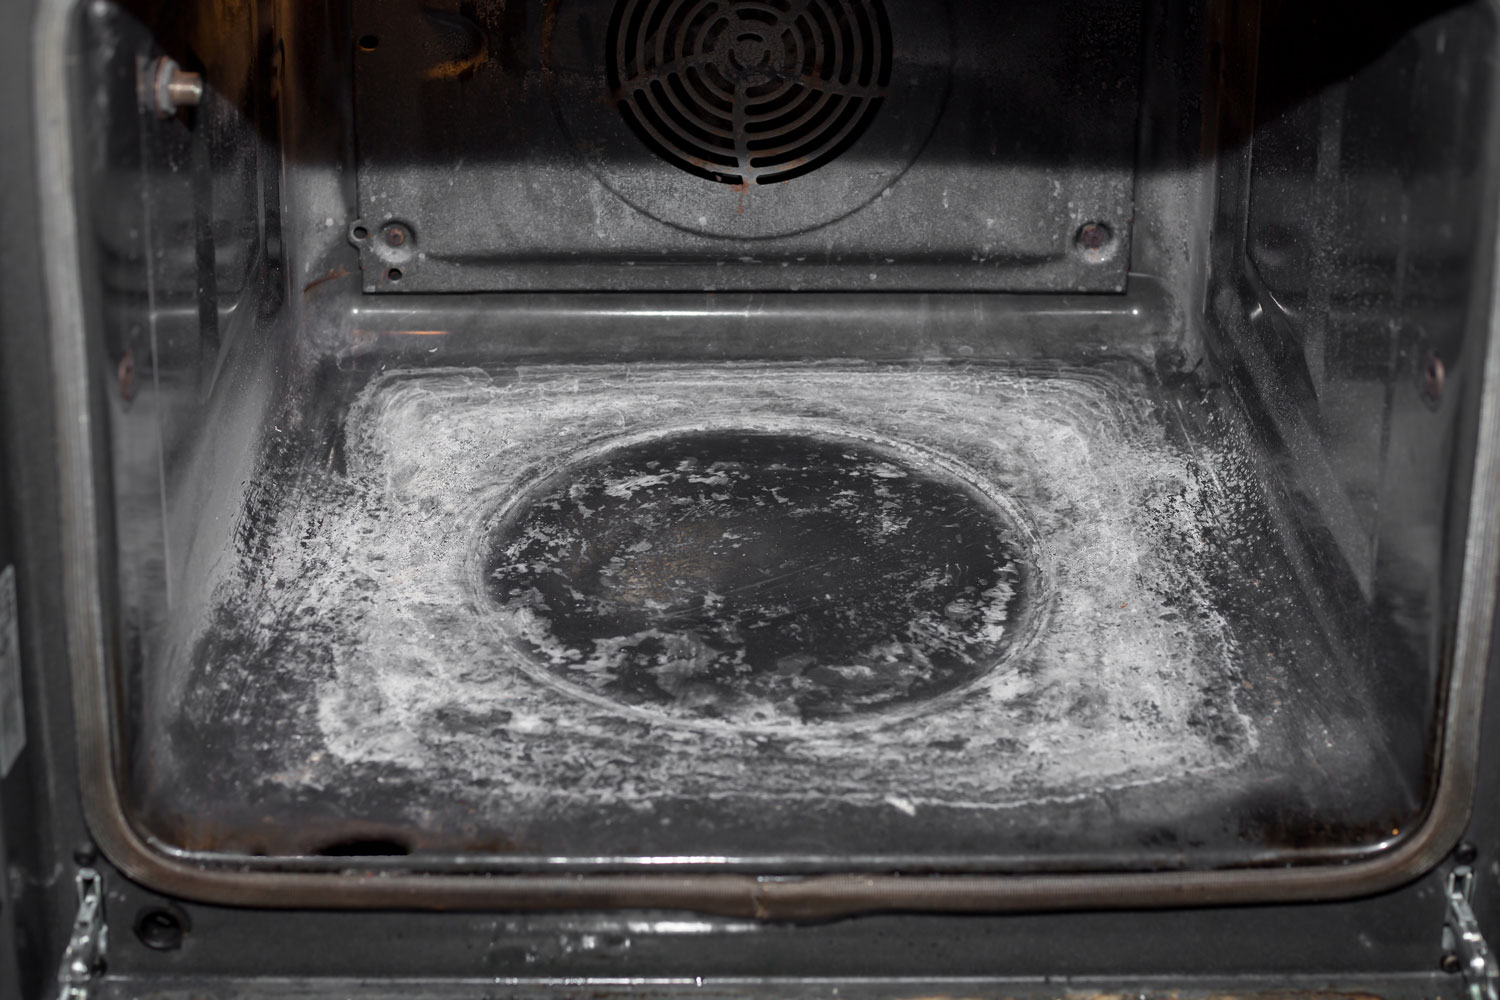 Oven after a self-cleaning, just wipe off
